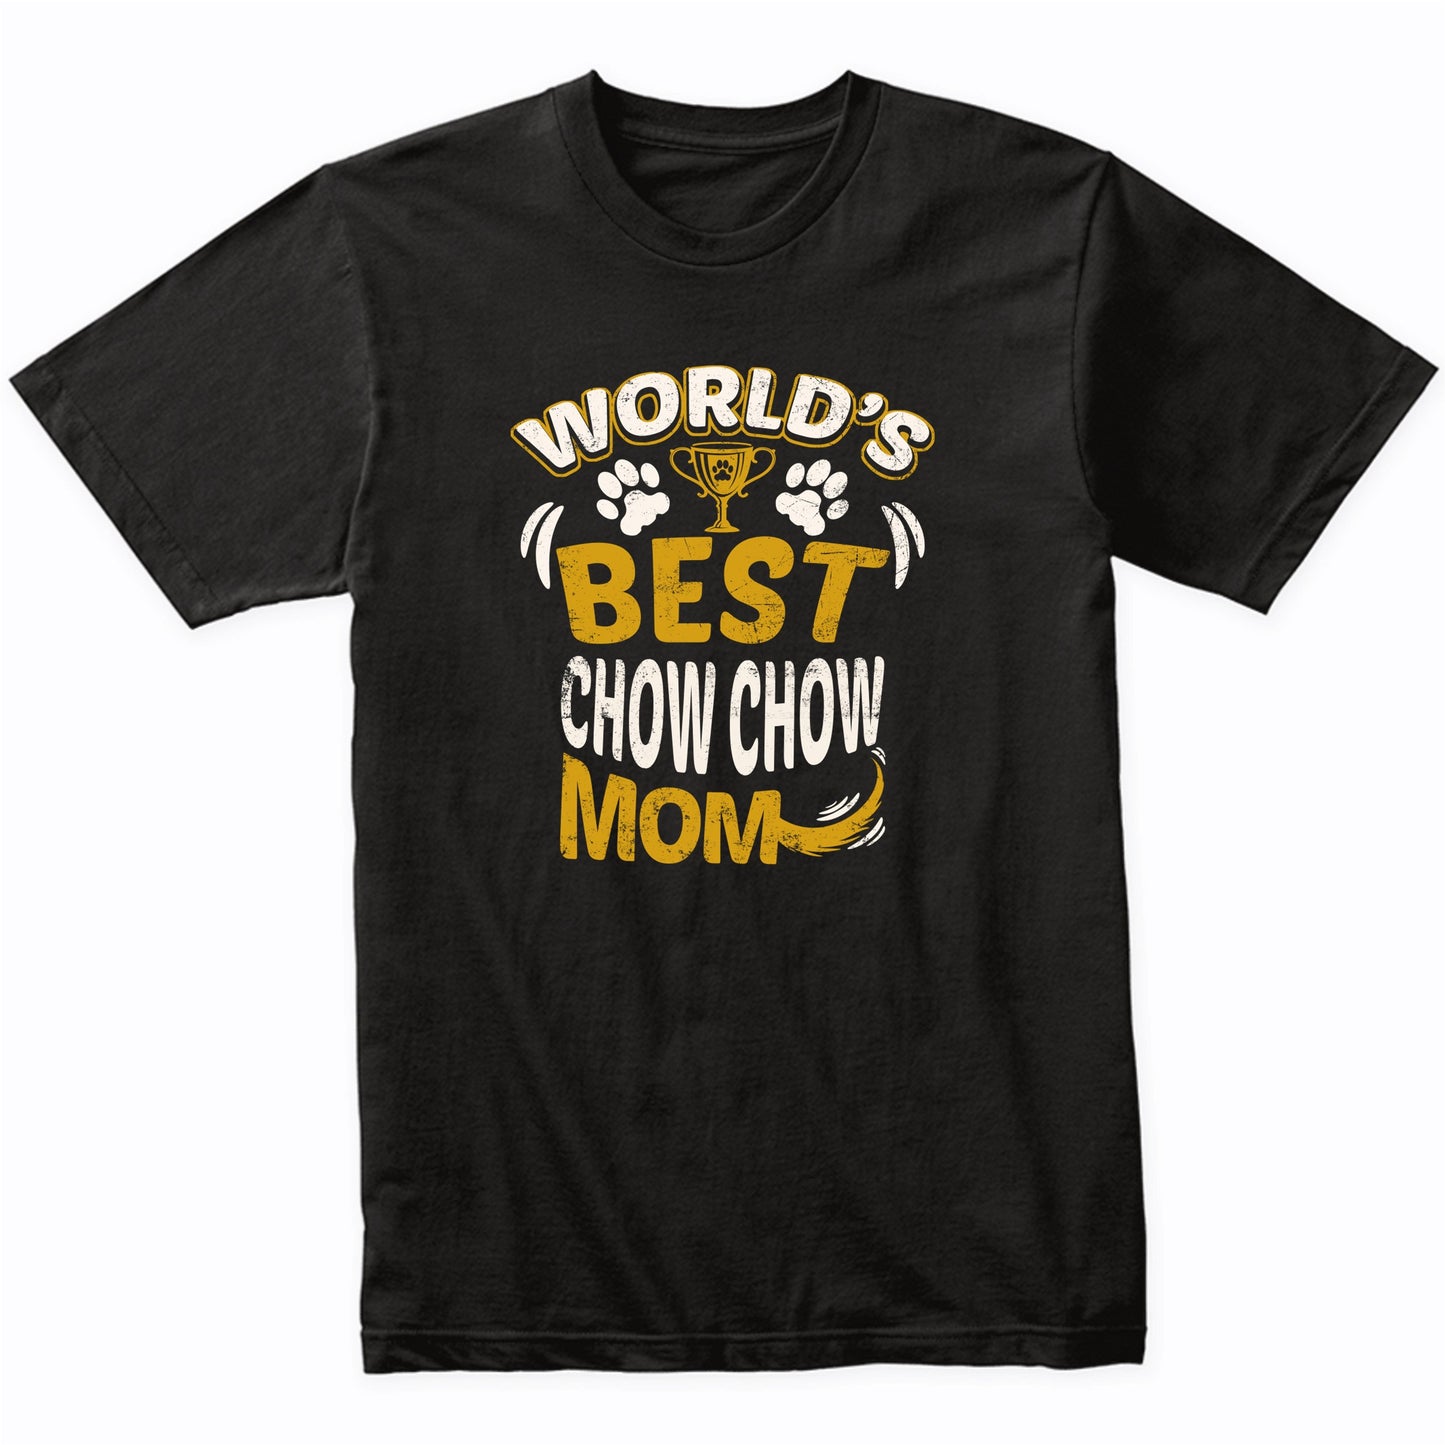 World's Best Chow Chow Mom Graphic T-Shirt